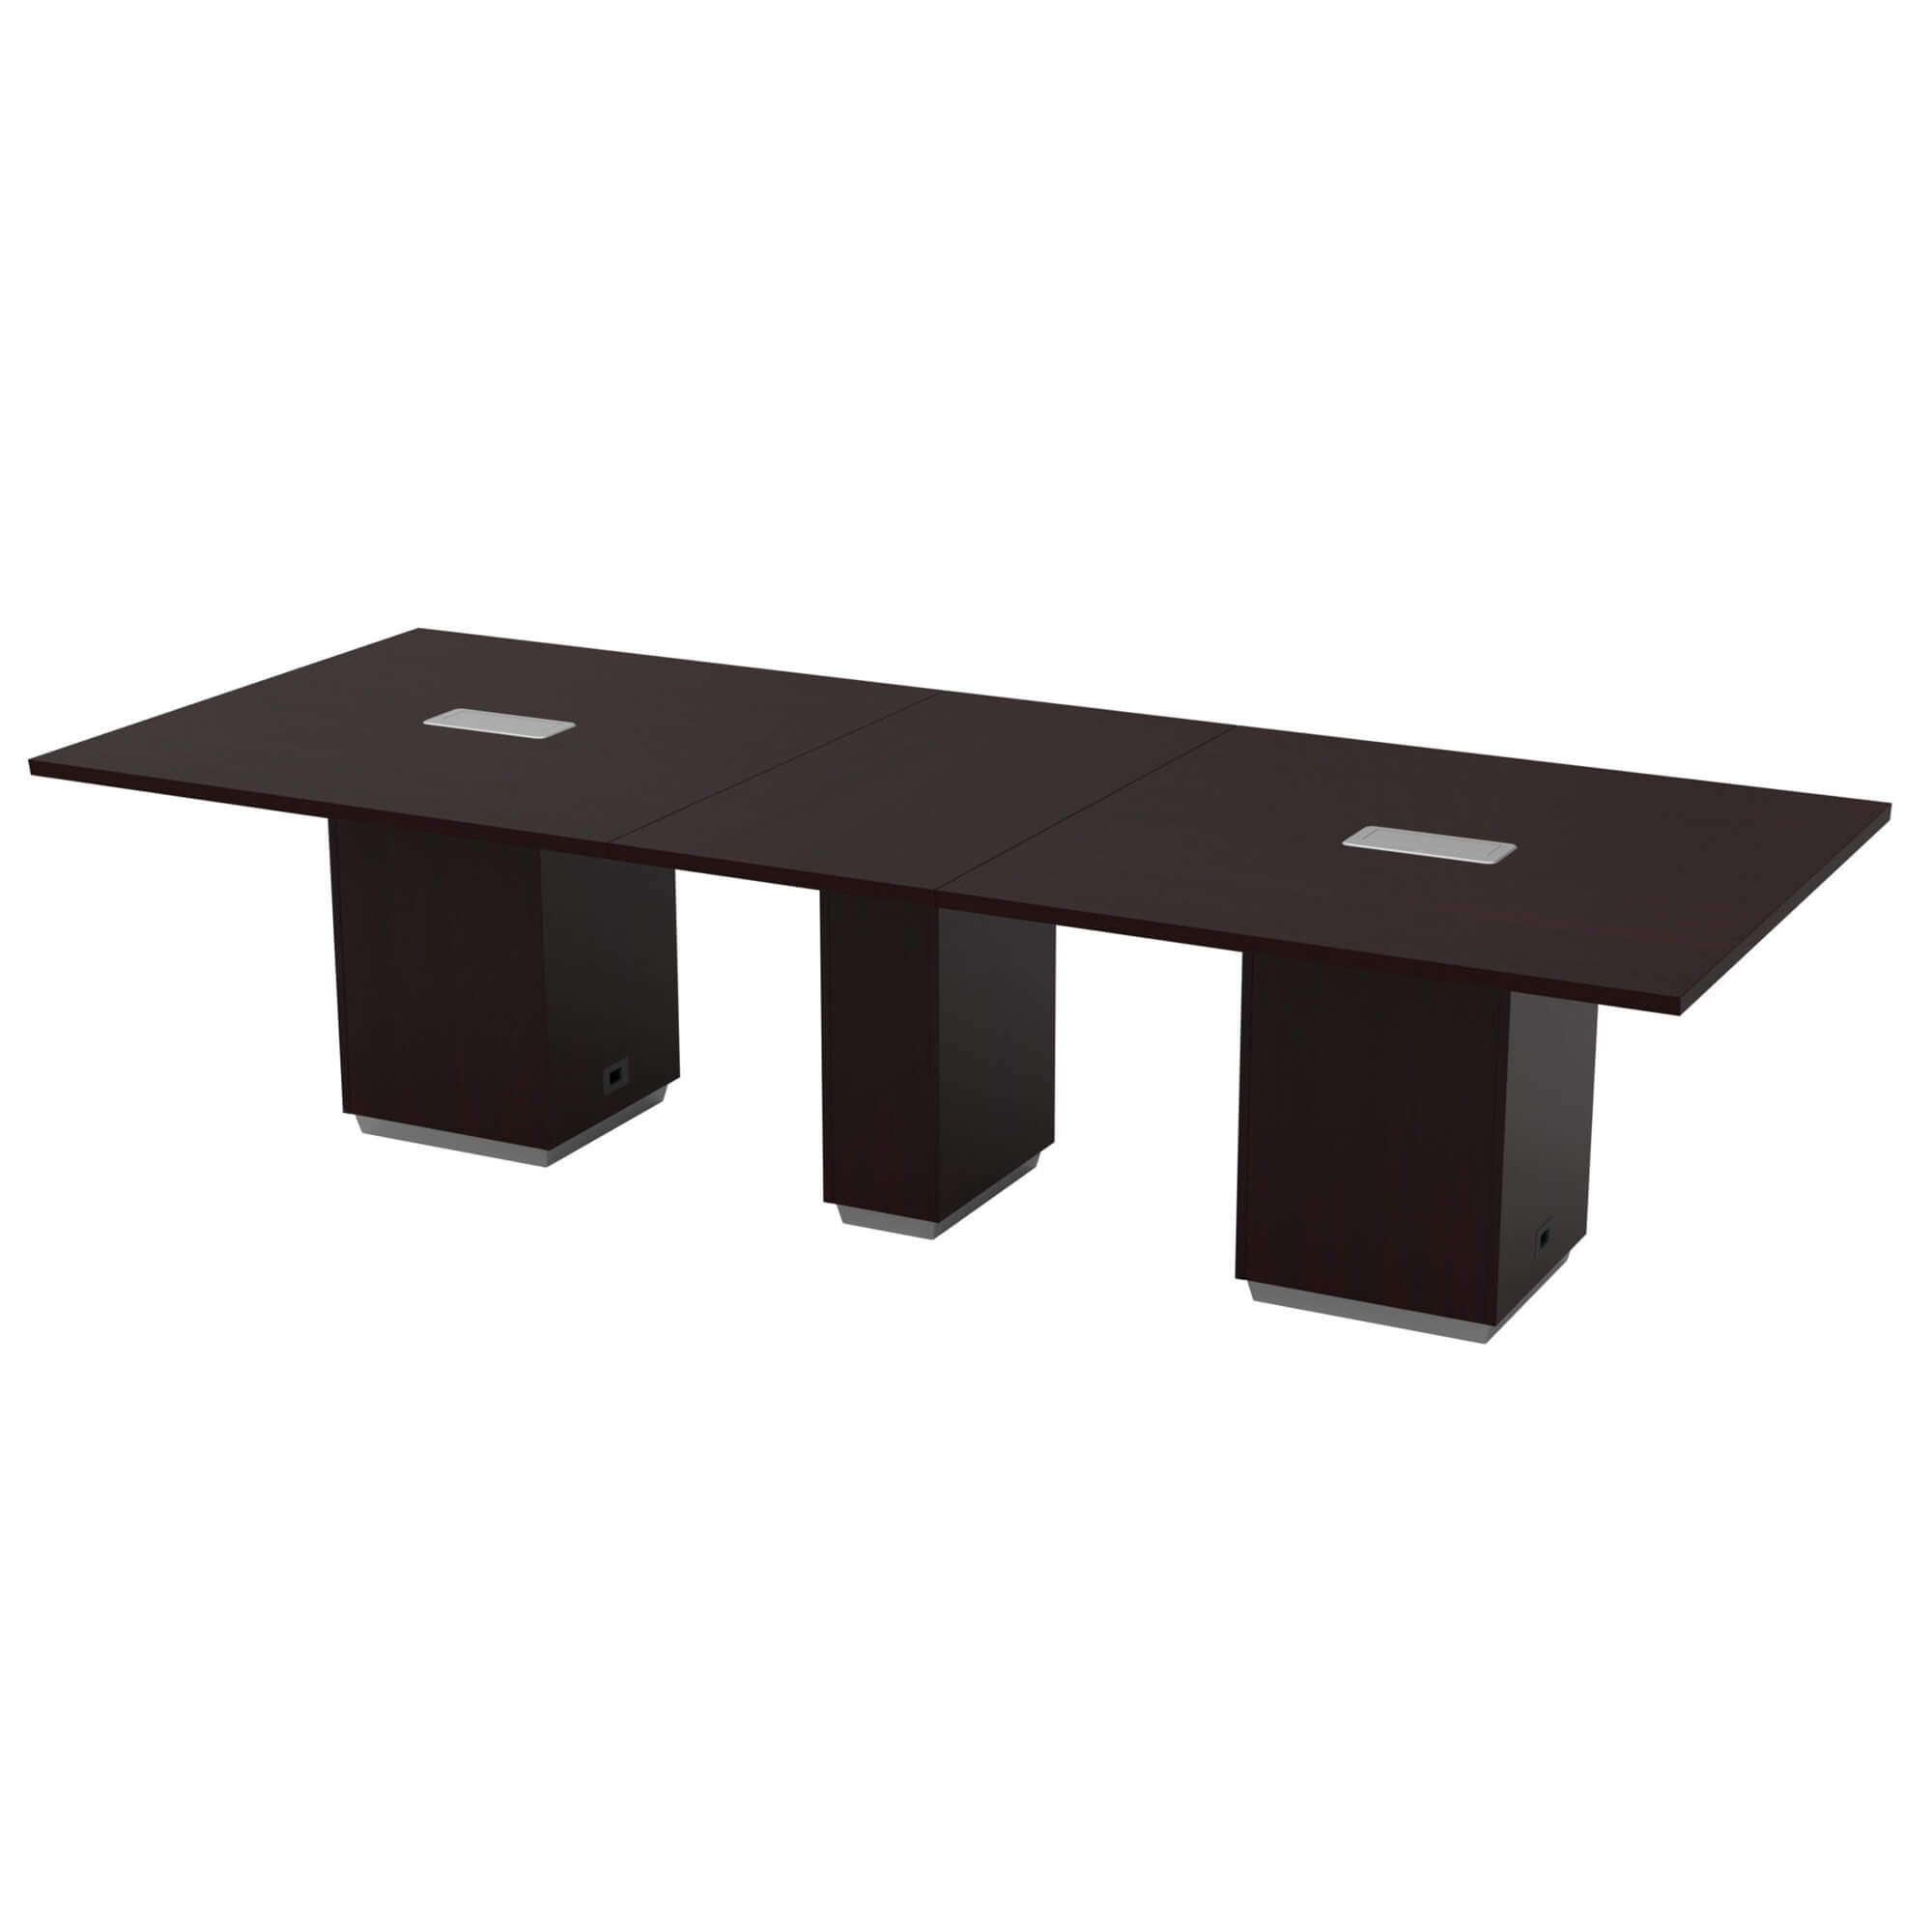 Conference tables CUB TUXDKR 61 PSO